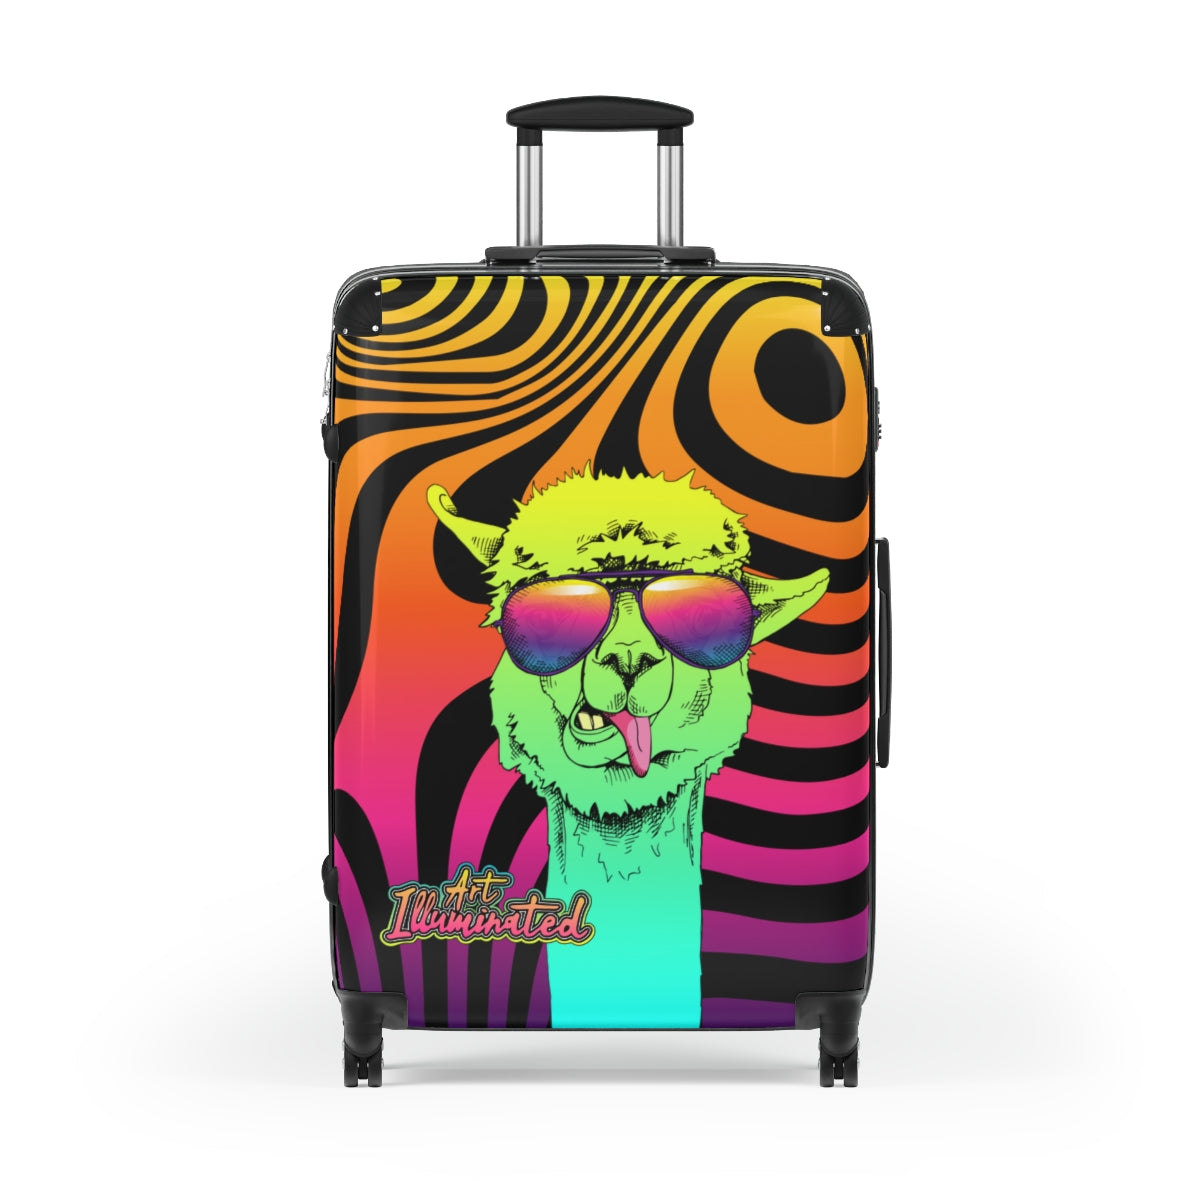 Who’s Your Llama Suitcase (small, medium, or large)